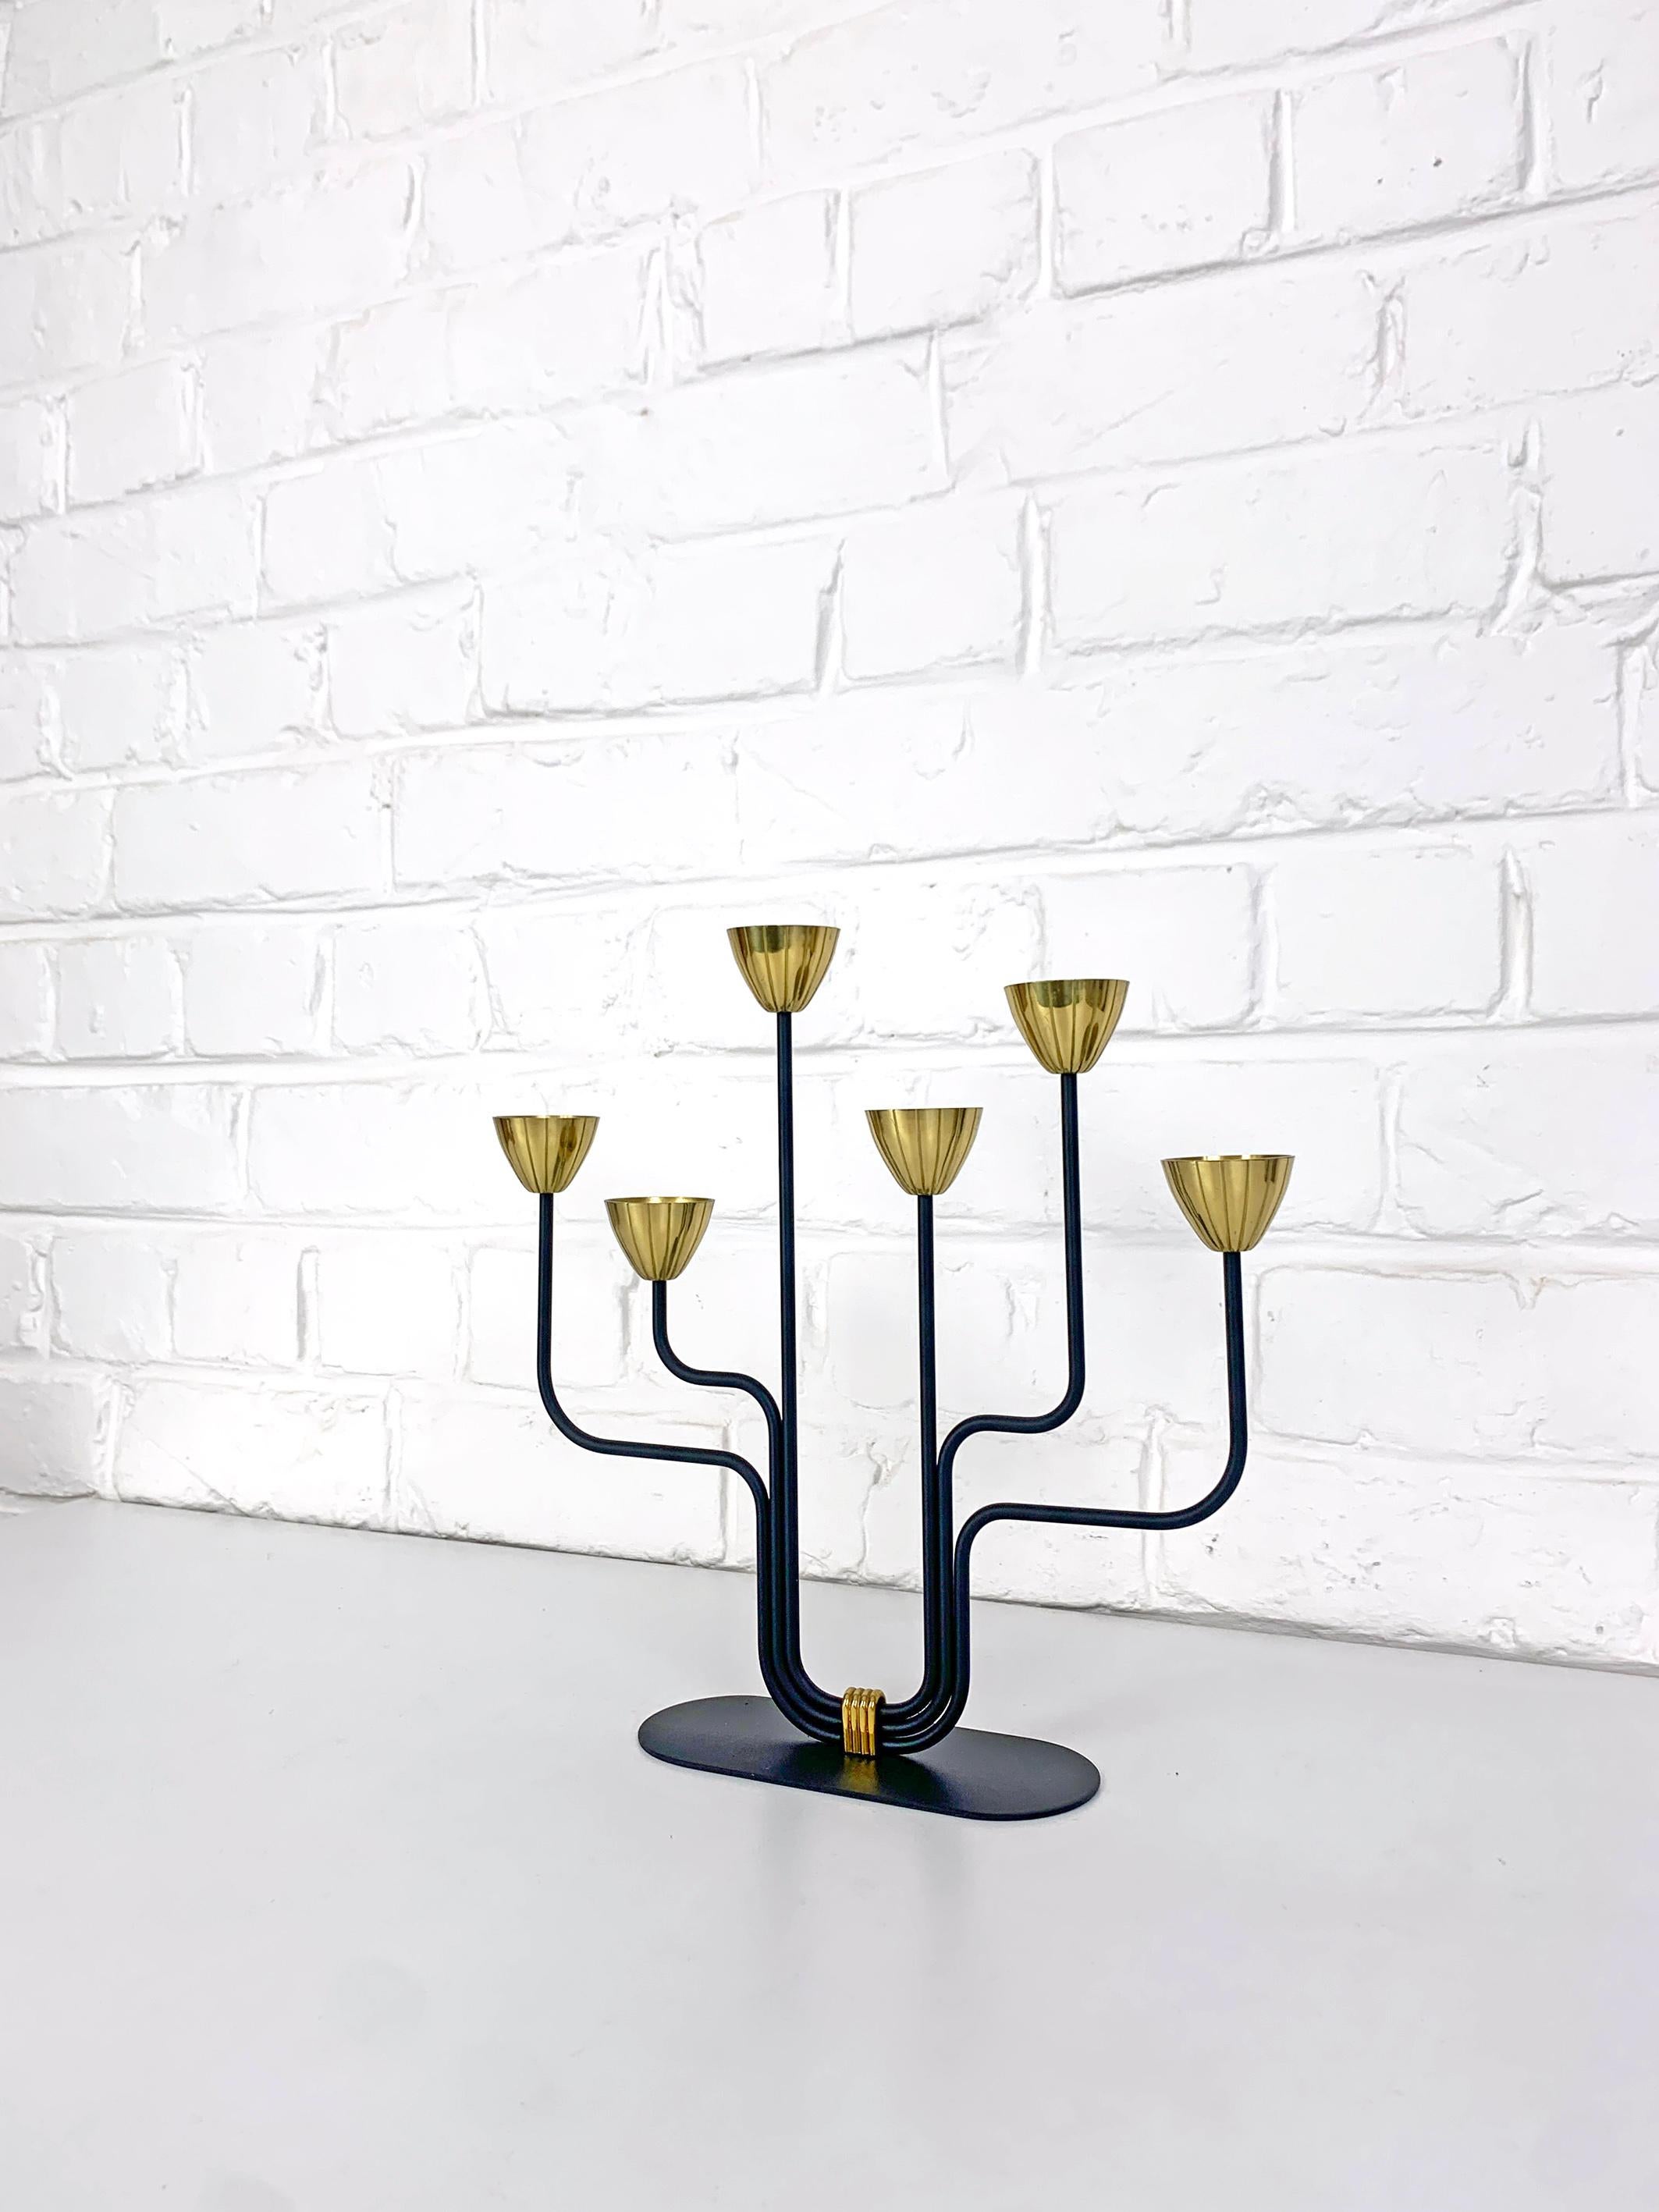 Swedish Modernist candle holder by Gunnar Ander. Produced by Ystad-Metall, located in the town of Ystad in Sweden. 

Stylised flowers in brass on 6 asymmetrical black enameled steel arms. This is the smaller model.

Both are signed with the Ystad